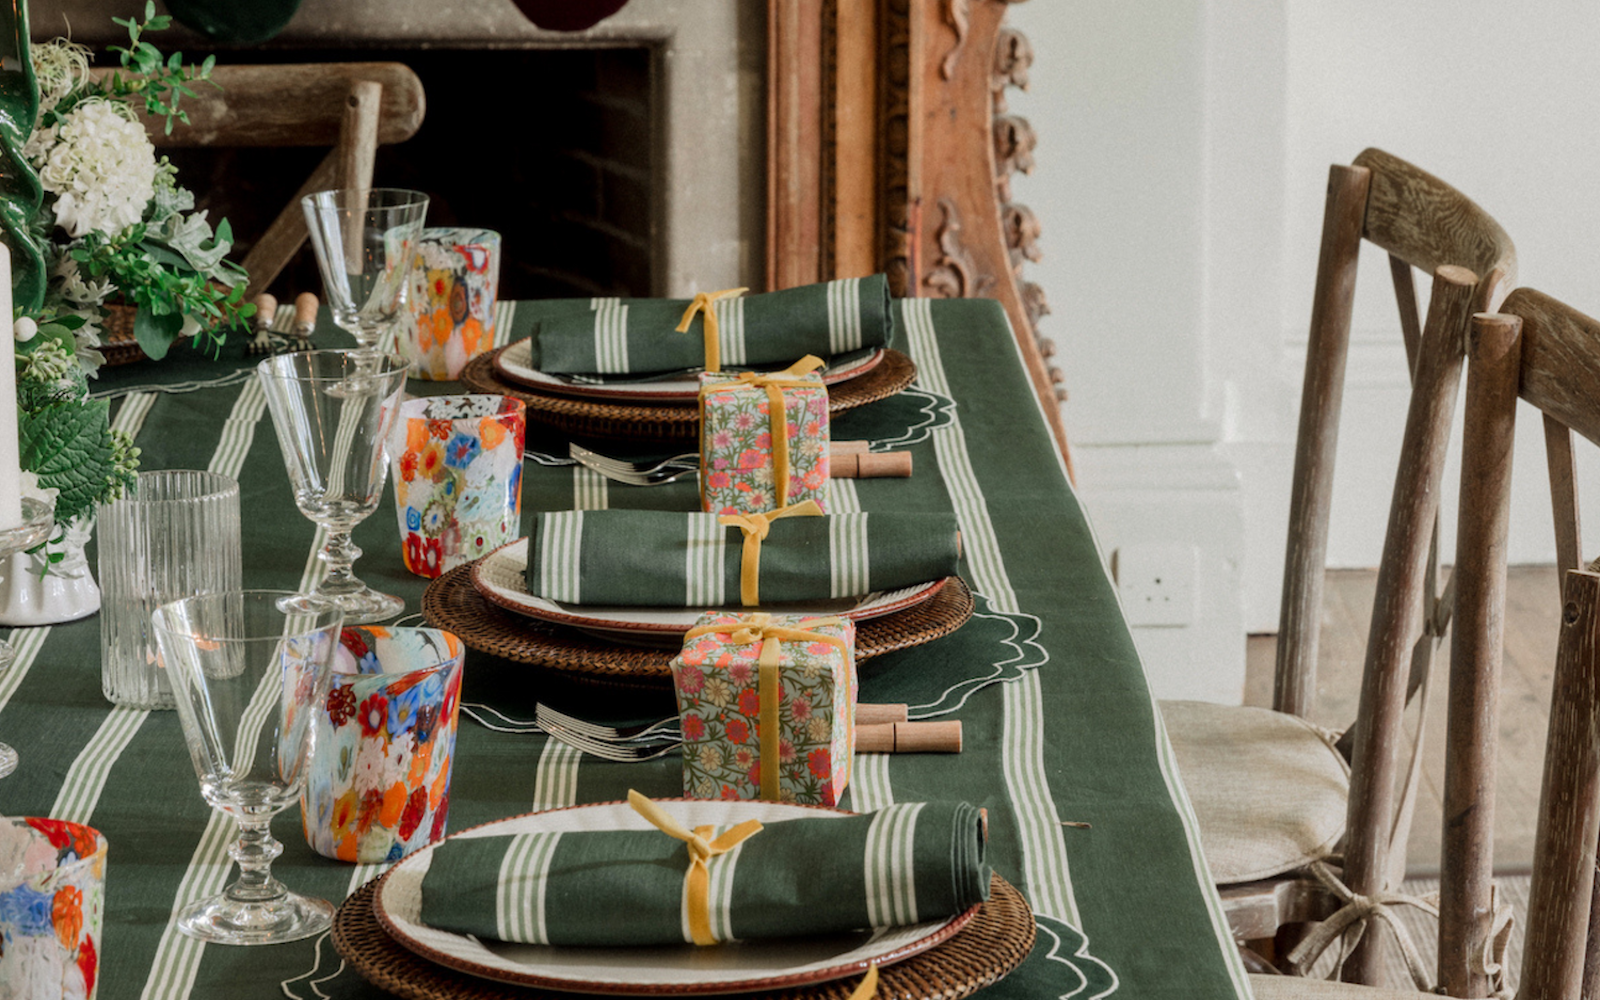 Summer Tablecloths For Alfresco Feasts, From £19